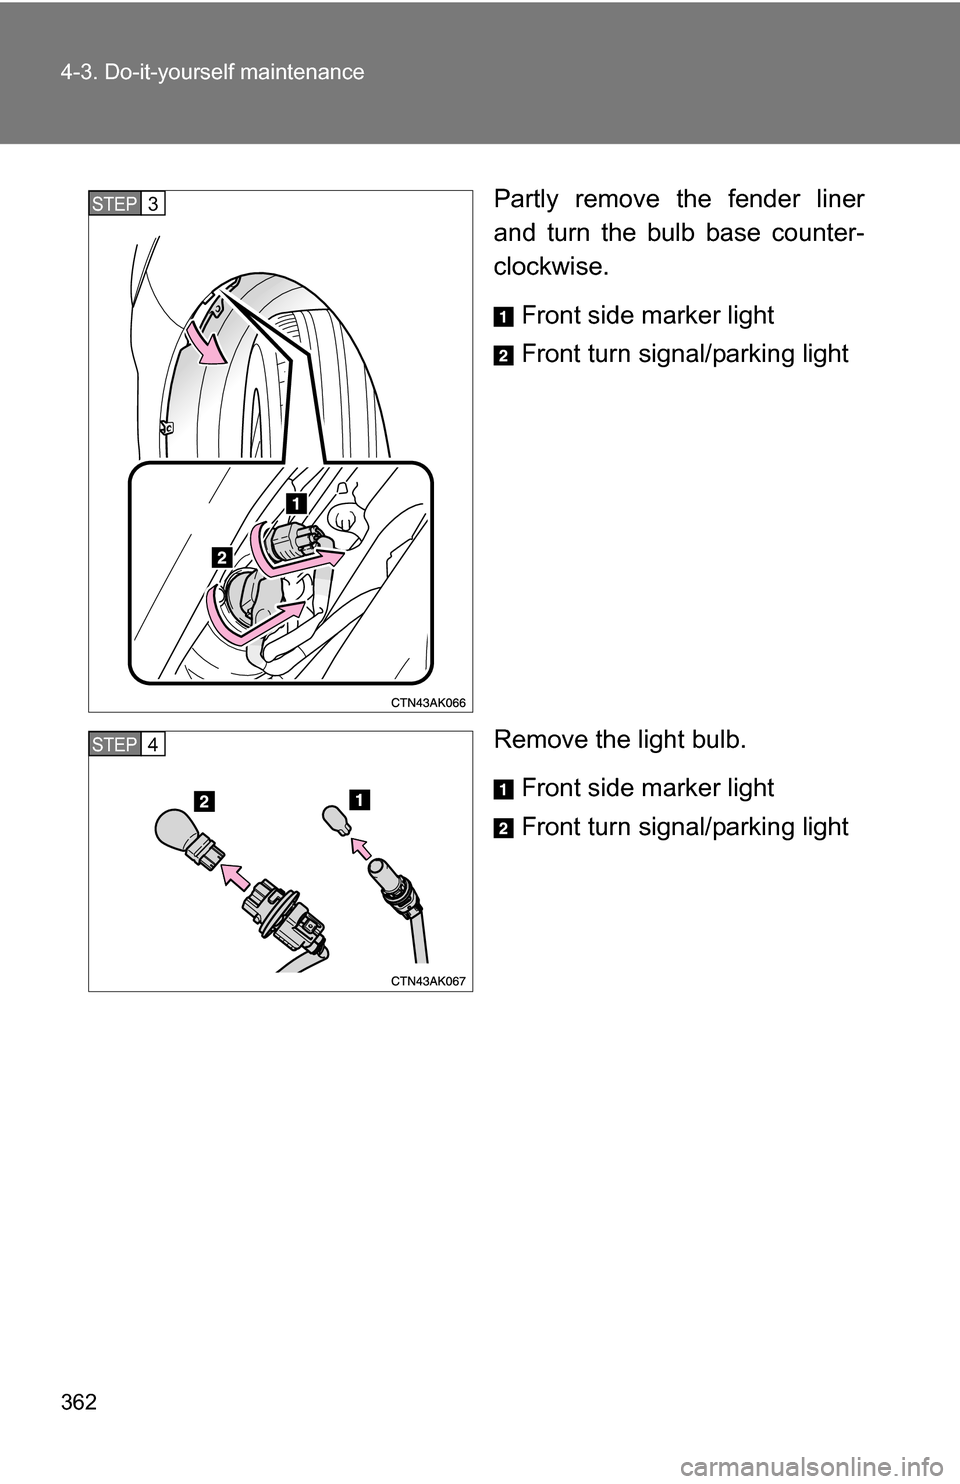 TOYOTA COROLLA 2009 10.G Owners Manual 362 4-3. Do-it-yourself maintenance
Partly remove the fender liner
and turn the bulb base counter-
clockwise.Front side marker light
Front turn signal/parking light
Remove the light bulb. Front side m